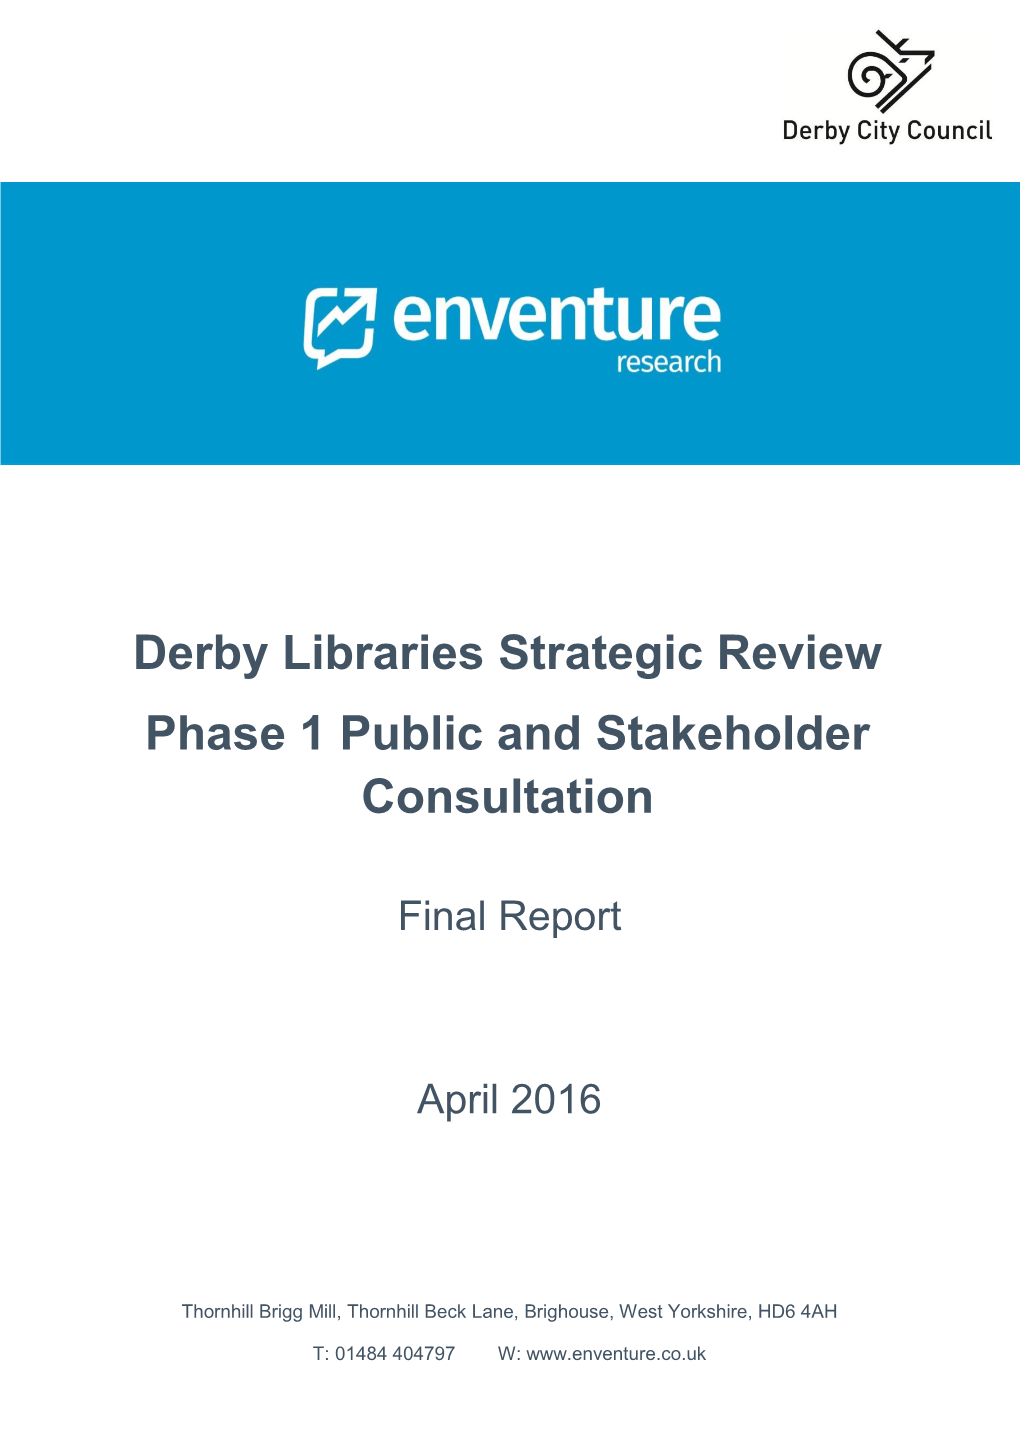 Derby Libraries Strategic Review Phase 1 Public and Stakeholder